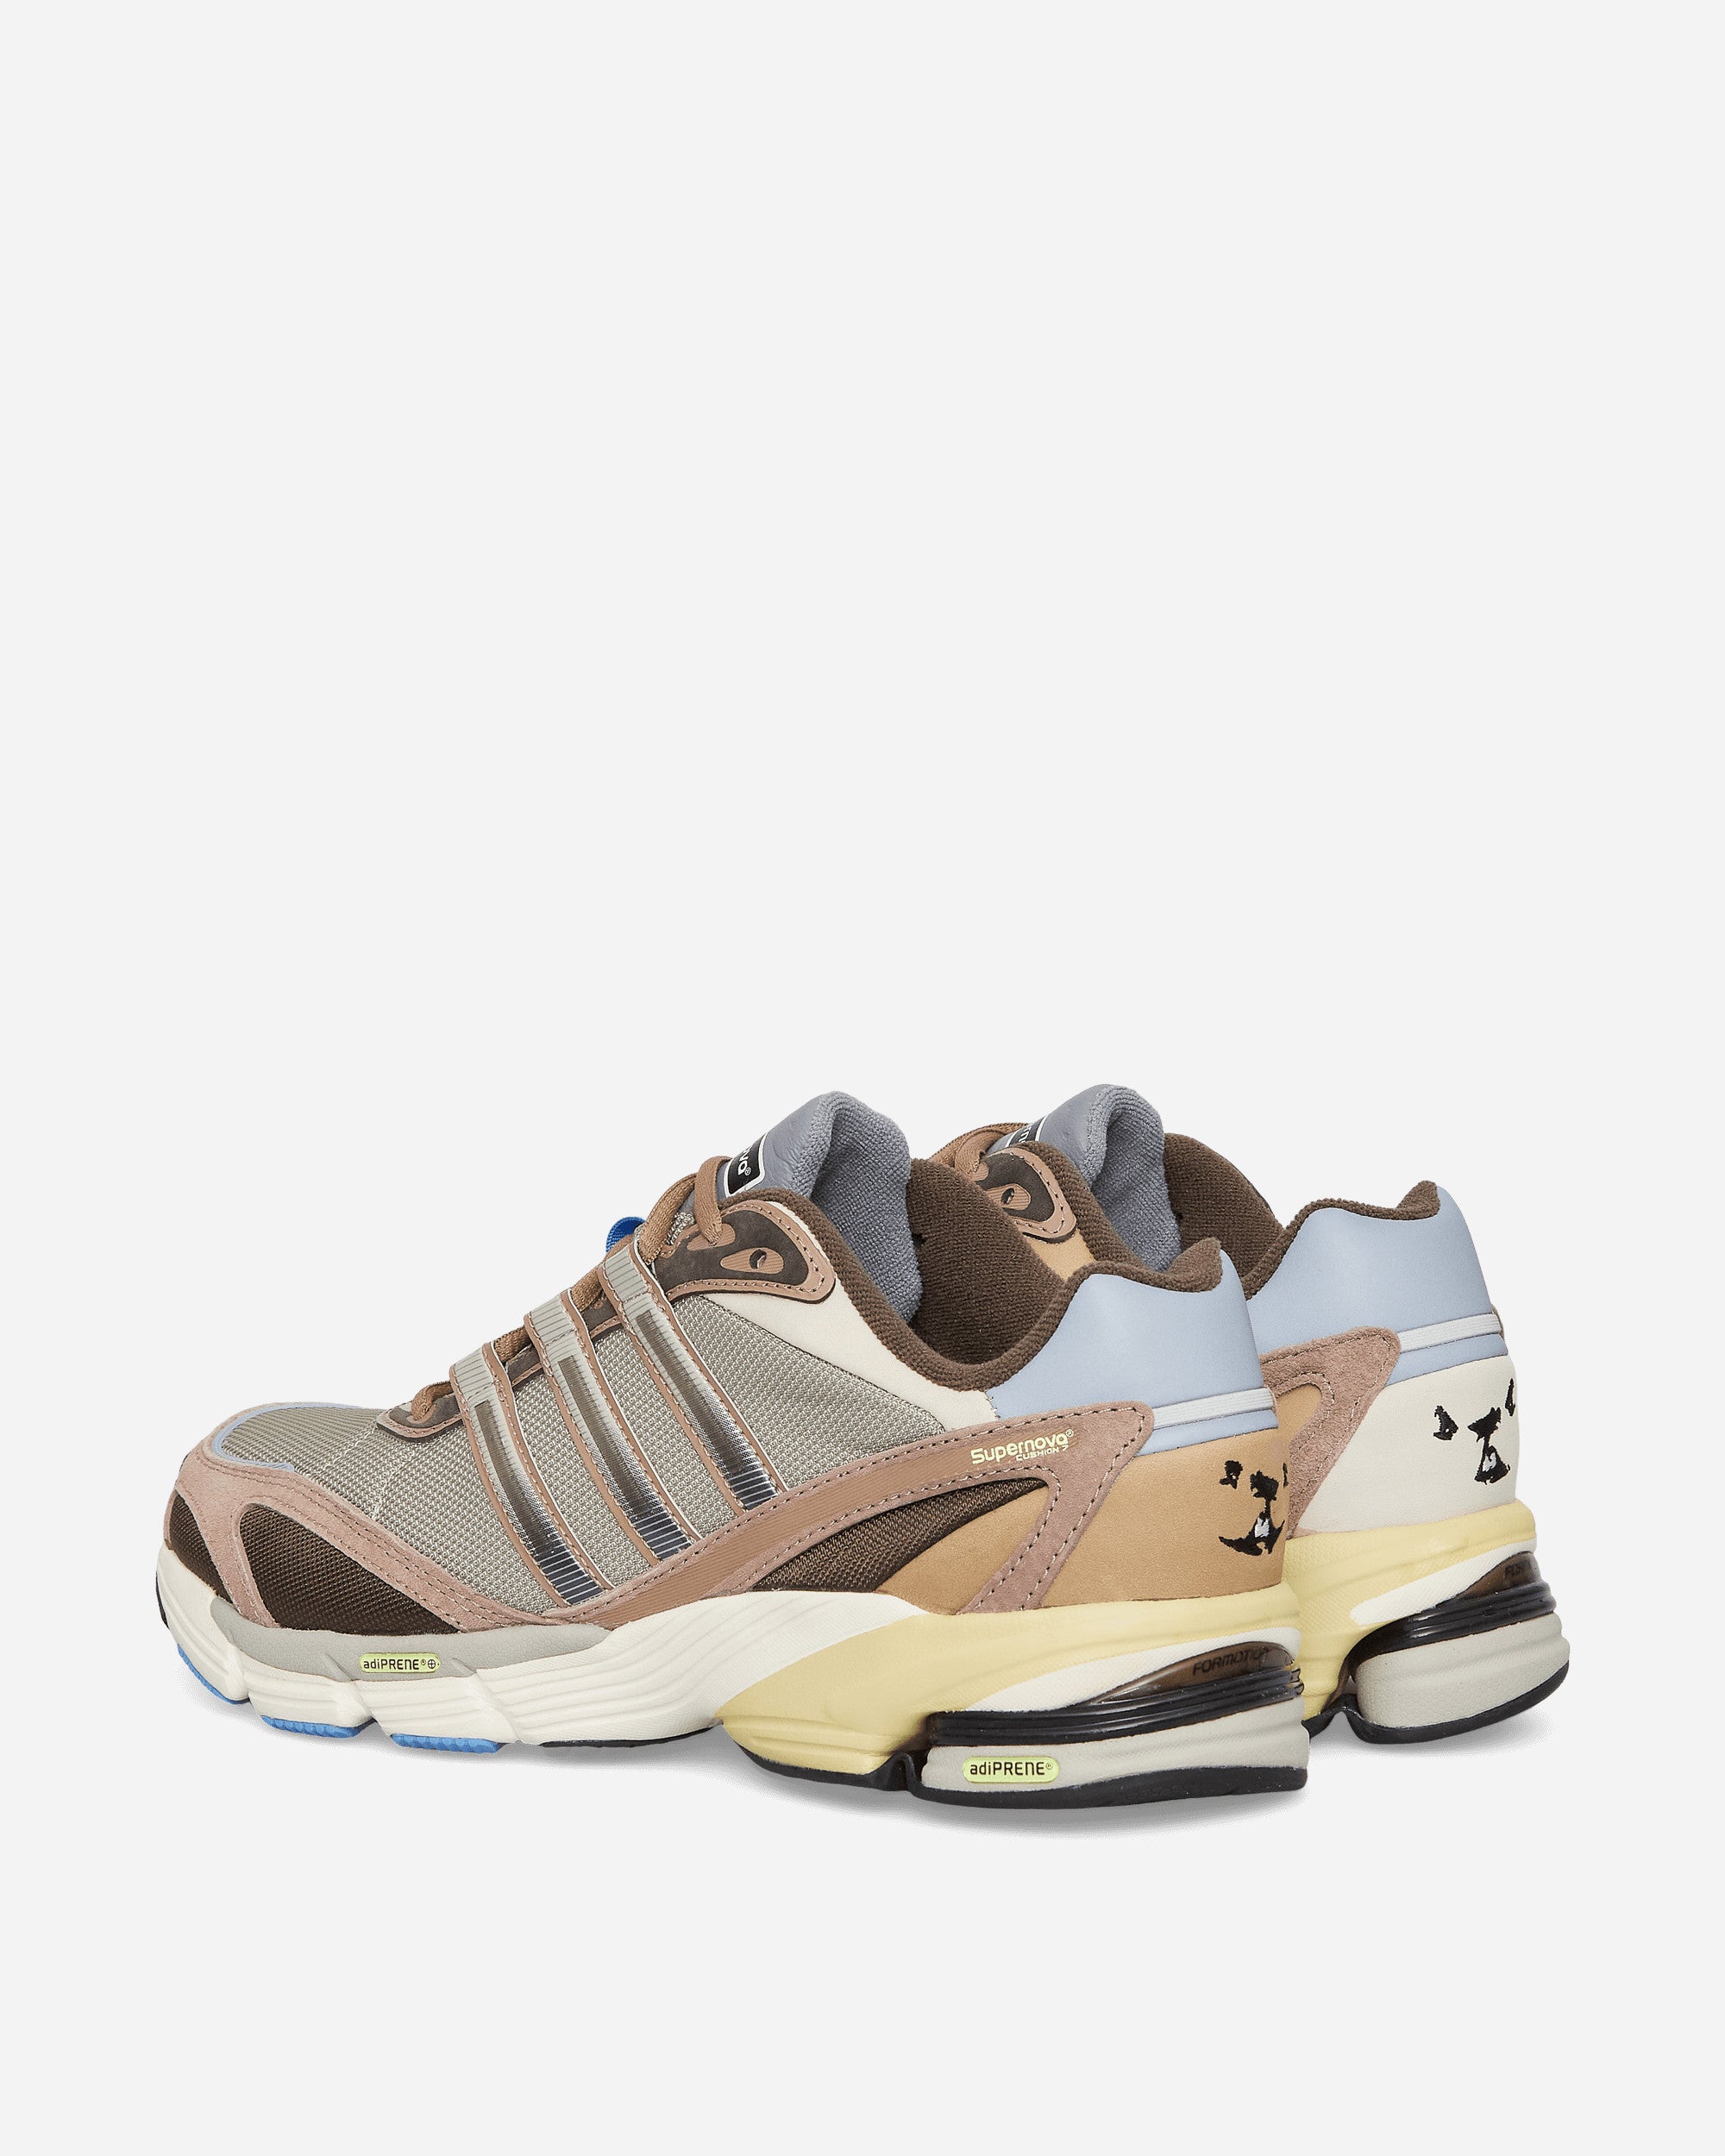 adidas Consortium Supernova Cushion 7 Chalky Brown/White Sneakers Low GZ4887